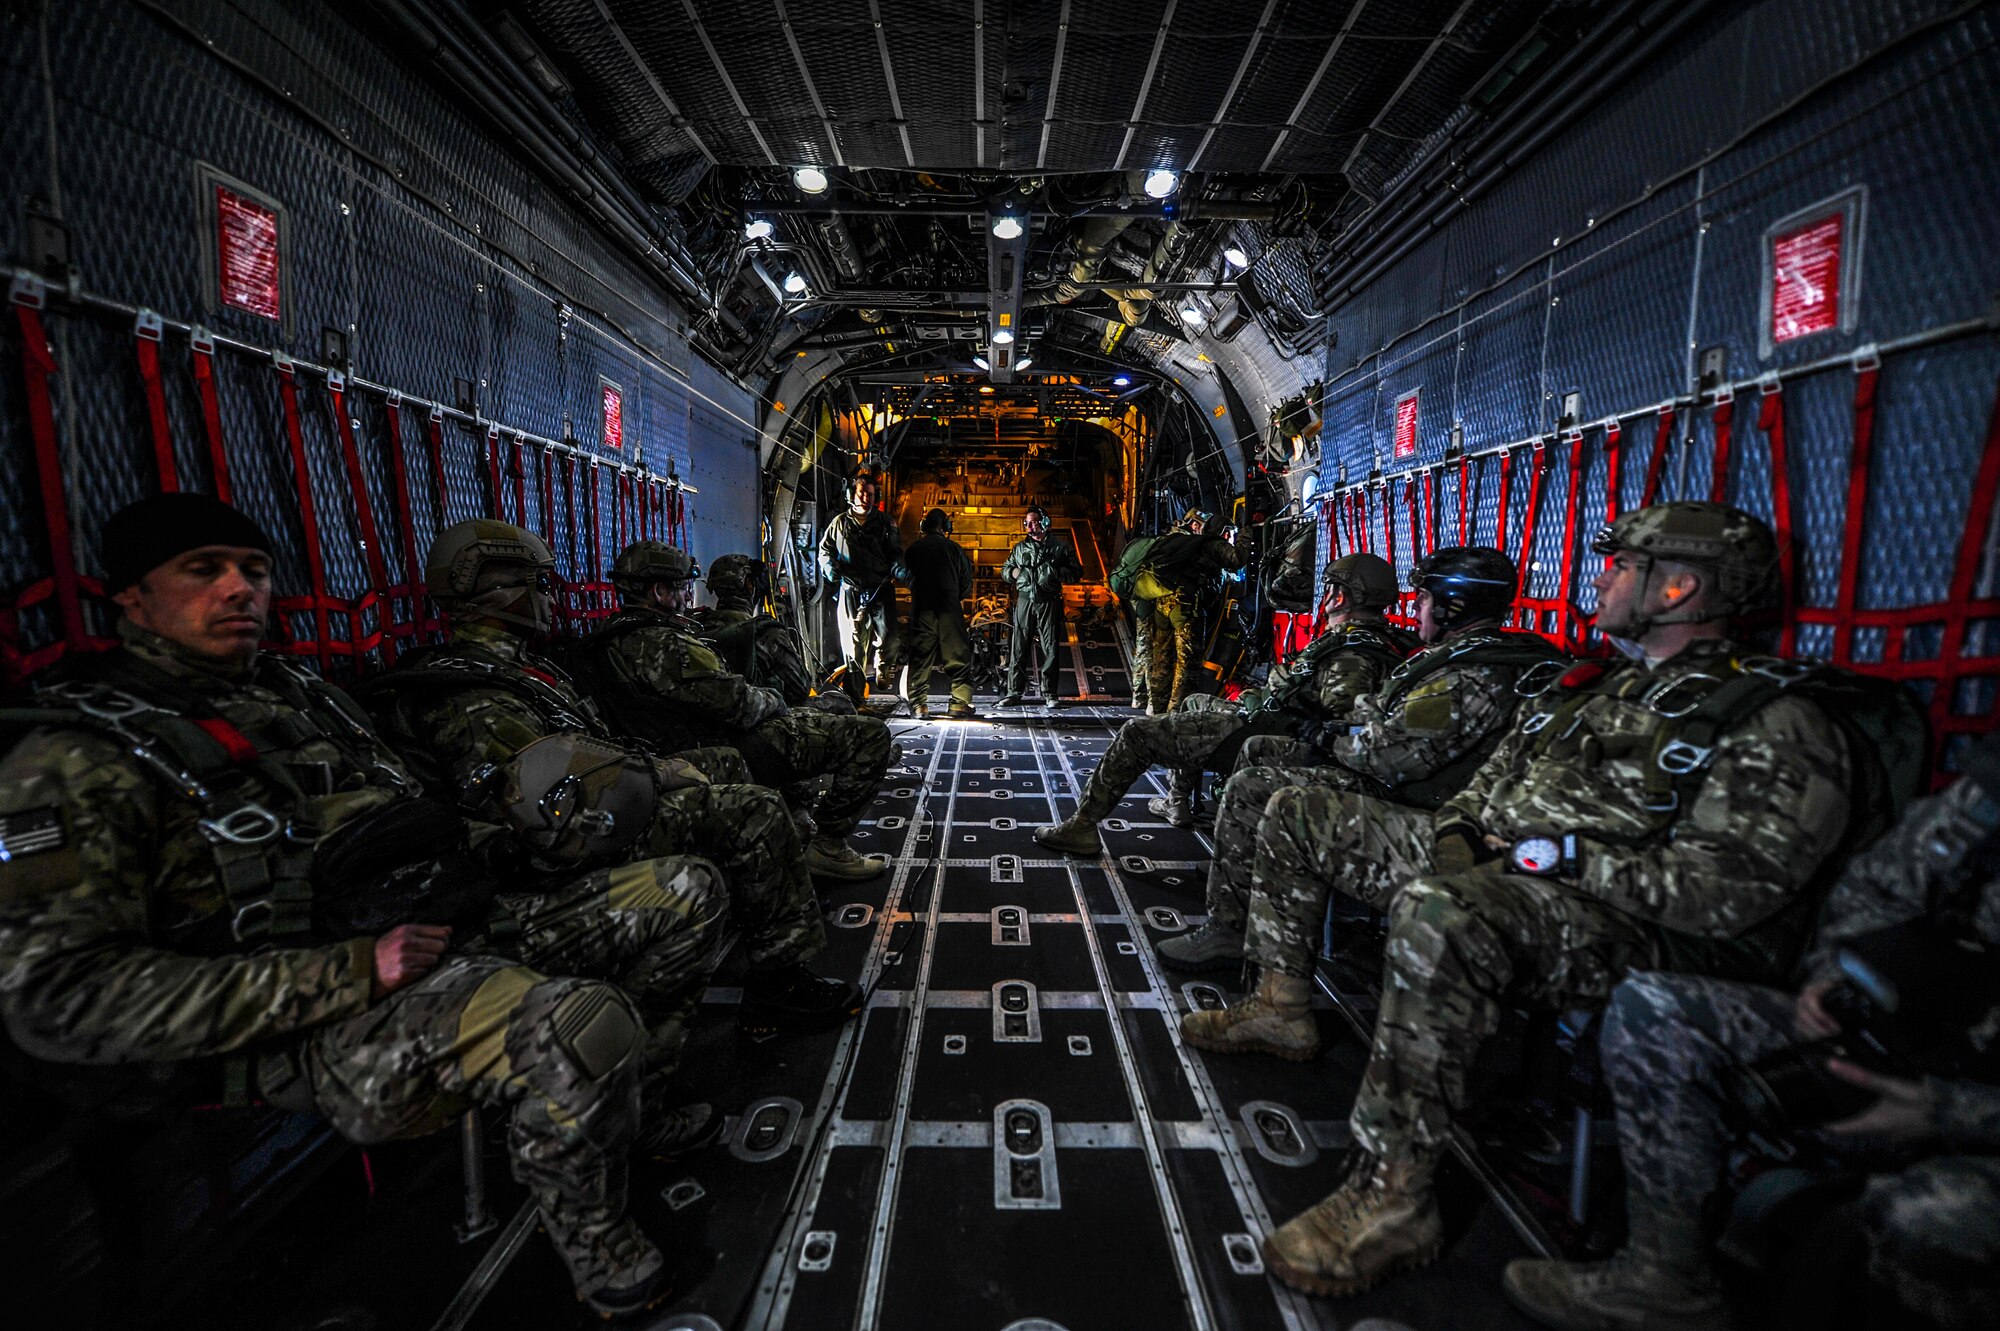 Special Tactics members from the 24th Special Operations Wing prepare to jump out of an MC-130H Talon II at Hurlburt Field, Fla., Jan. 7, 2014. A group of 16 jumpers trained for real-world jumps into austere or hostile environments, when aircraft aren’t able to land in enemy territory or rough terrain.  (U.S. Air Force photo/Senior Airman Christopher Callaway)